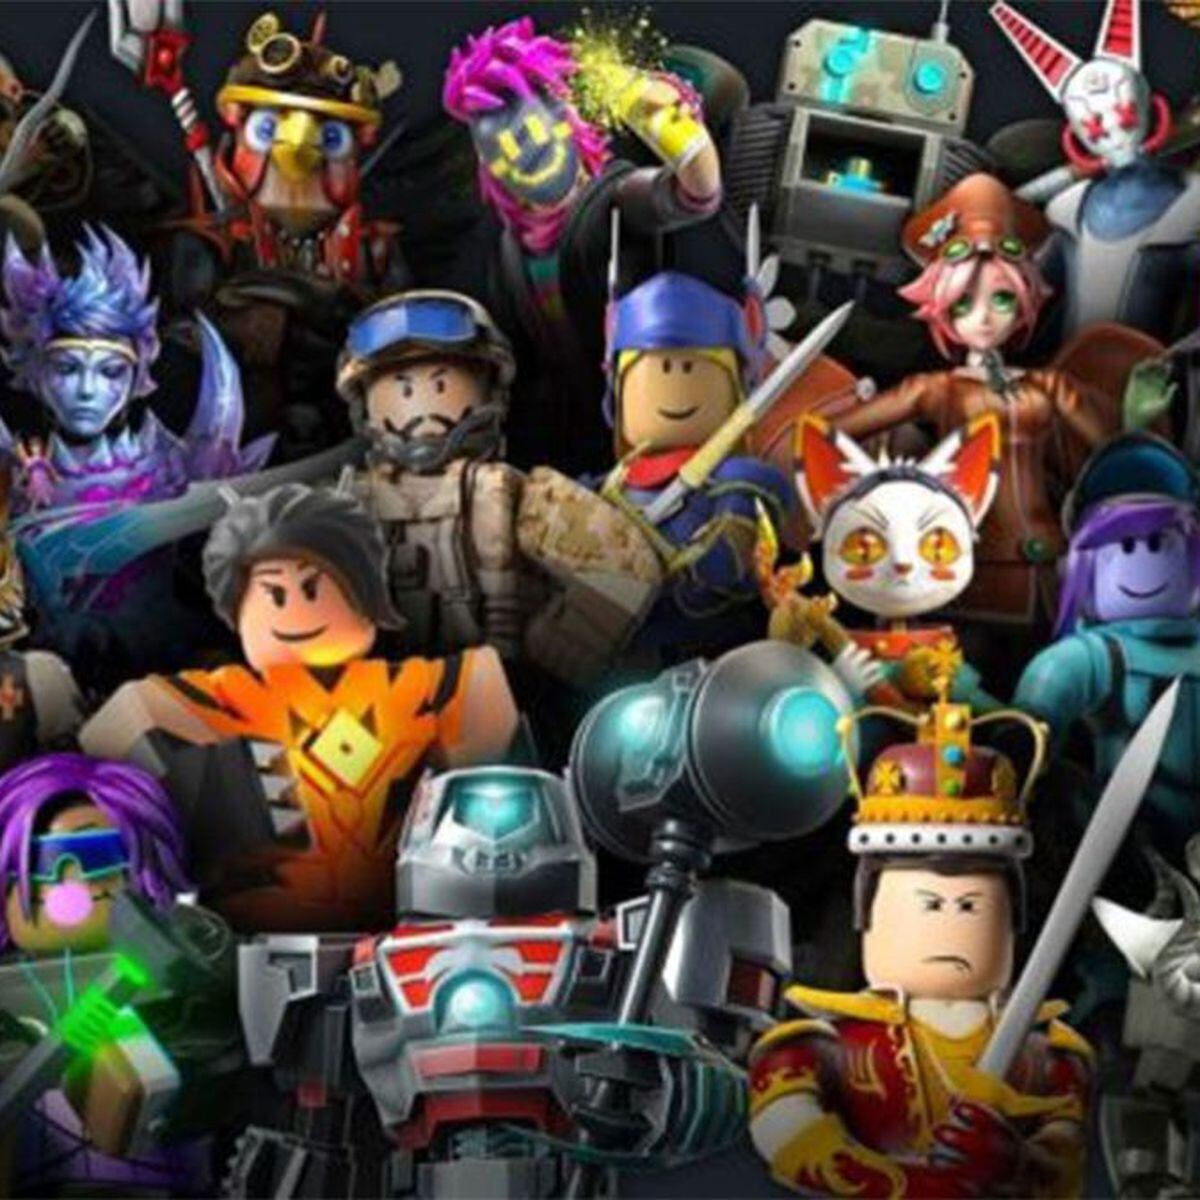 Roblox gambling sites are allowing minors to spend millions of dollars,  according to a new report - Meristation